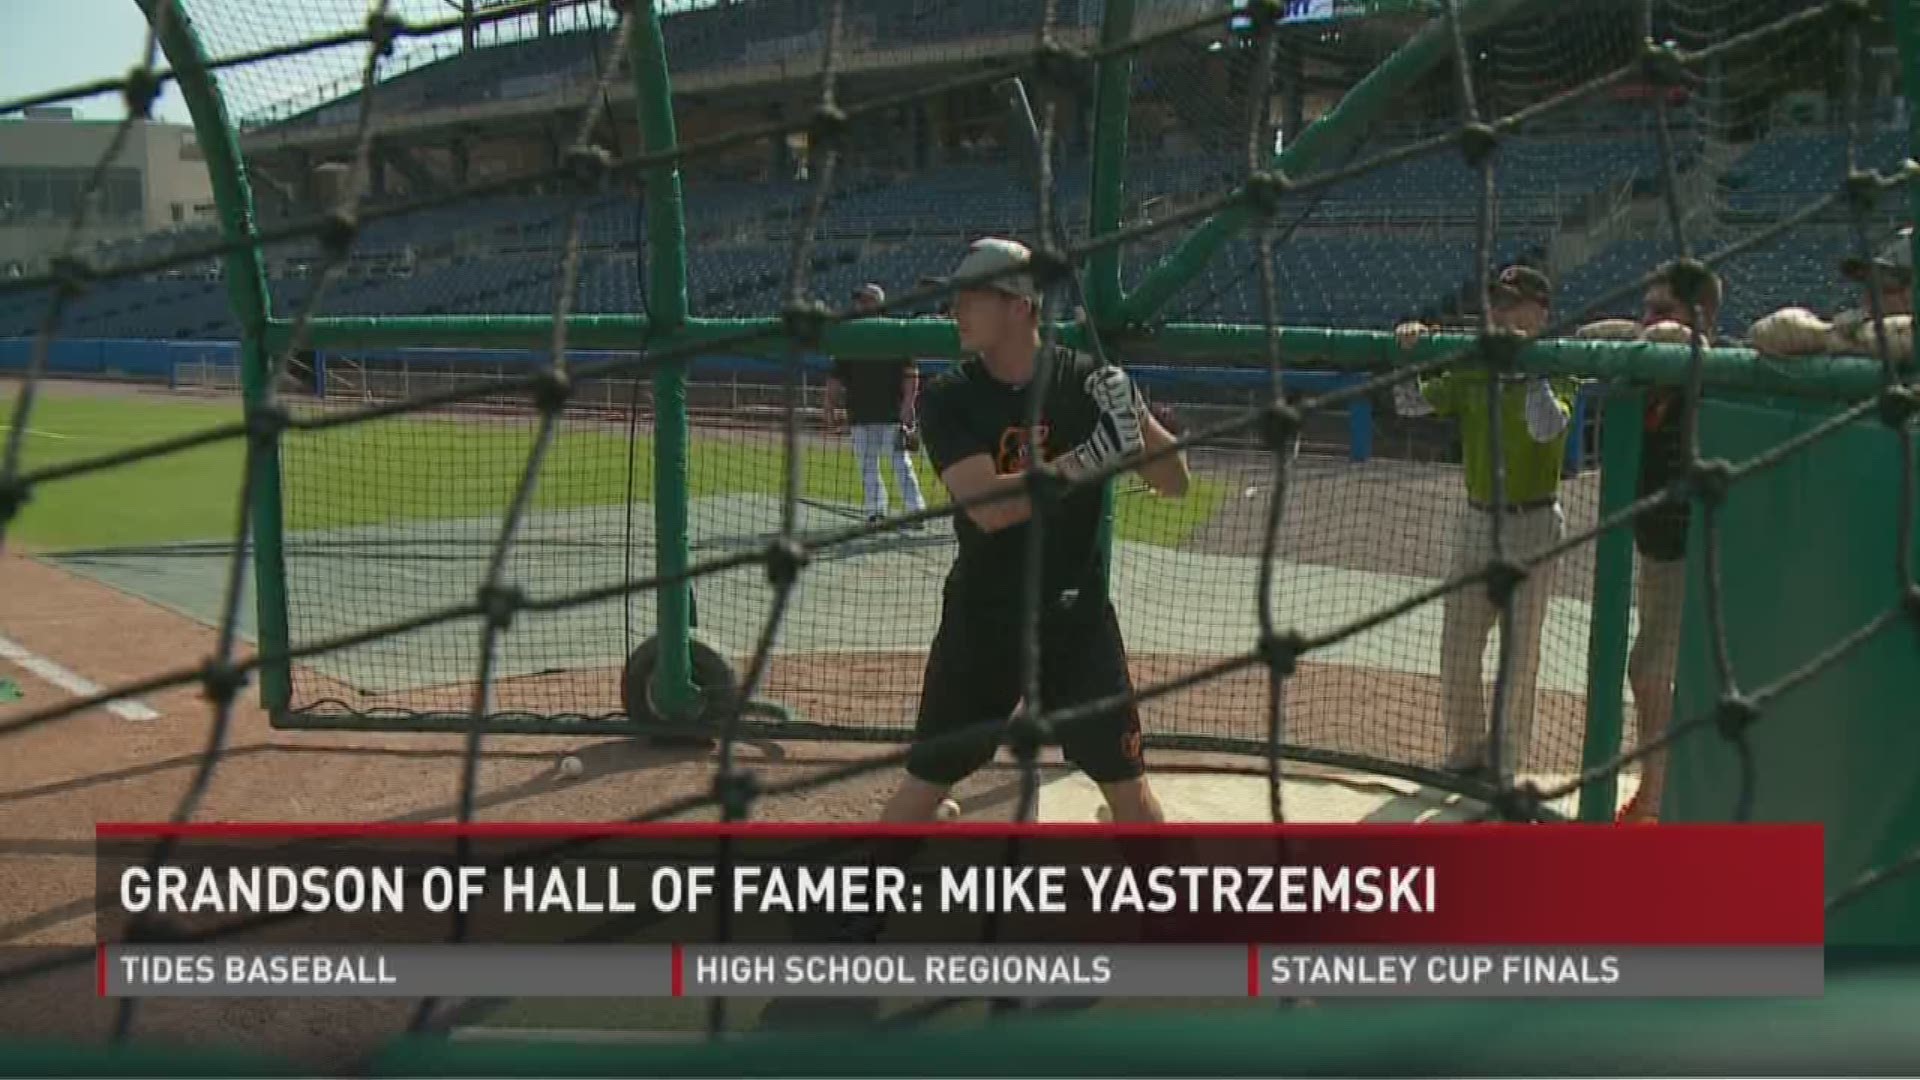 Mike Yastrzemski is just carrying on the family business. His grandfather Carl Yastrzemski is a Baseball Hall of Famer.